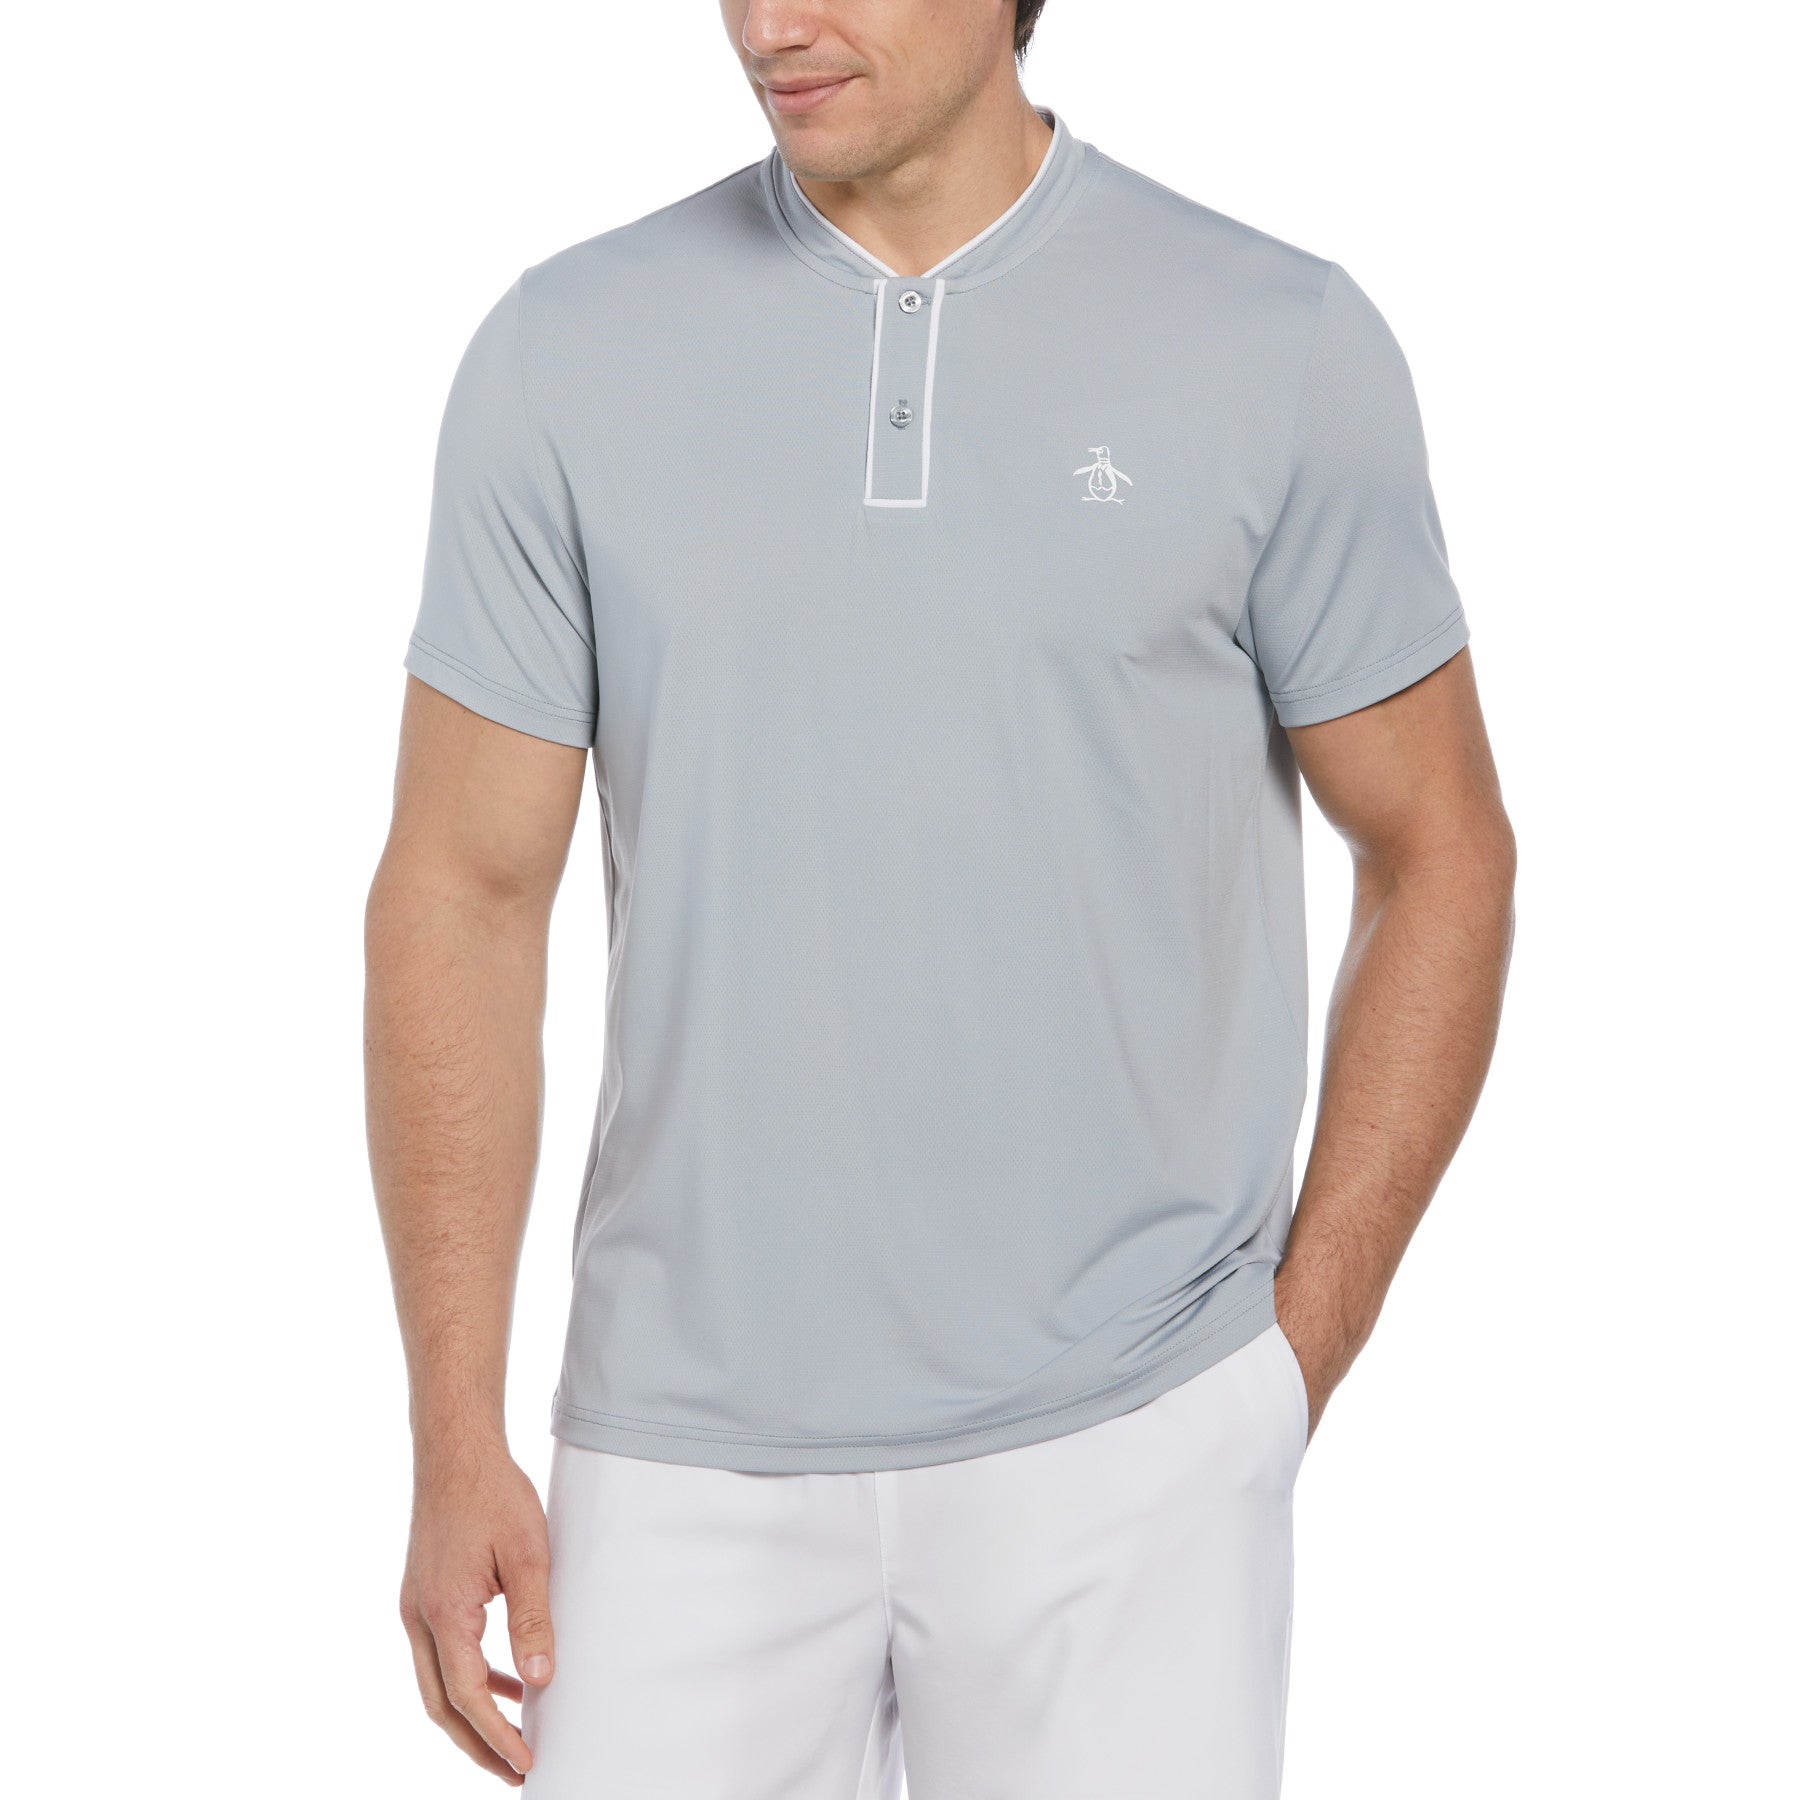 View Piped Blade Collar Performance Tennis Polo Shirt In Quarry information